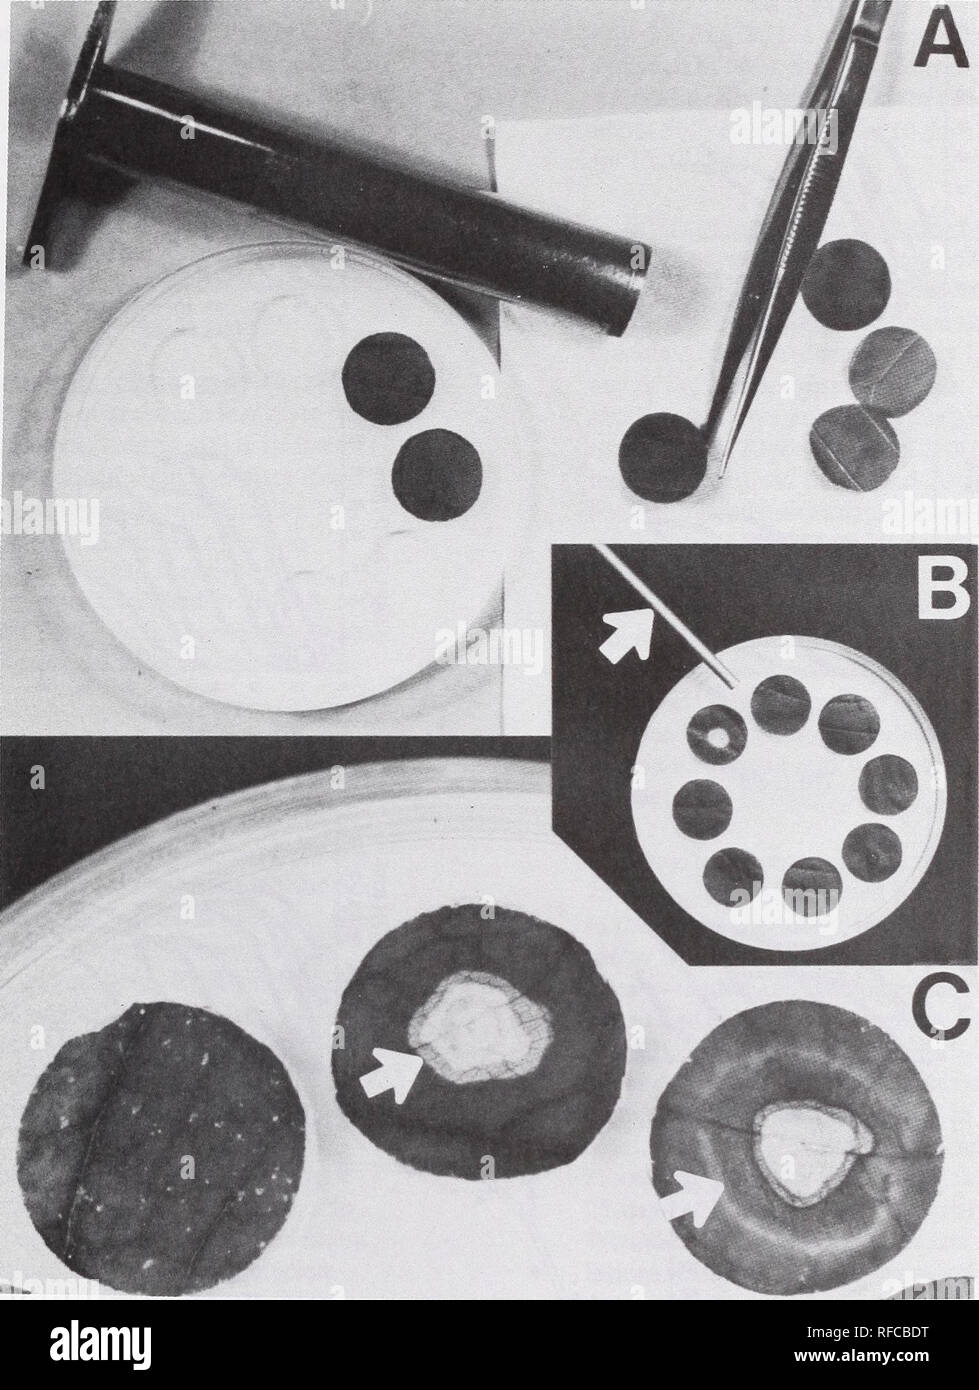 . Recent research on foliage diseases : conference proceedings : Carlisle, Pennsylvania, May 29-June 2, 1989. Leaves Diseases and pests United States Congresses. Figure 1.—In vitro technioque used to study infection of green ash by Gnomoniella fraxini. A. Plastic petri dish (100 mm diam.) containing 2% water agar (4 mm deep) with wells cut using a sterile cork borer (18 mm diam.) and leaf discs of corresponding size being placed into wells with a sterile forceps. B. Arrangement of ash leaf discs in wells in water agar. Arrow indicates 4 mm diam. aluminum rod the tip of which was heated and tou Stock Photo